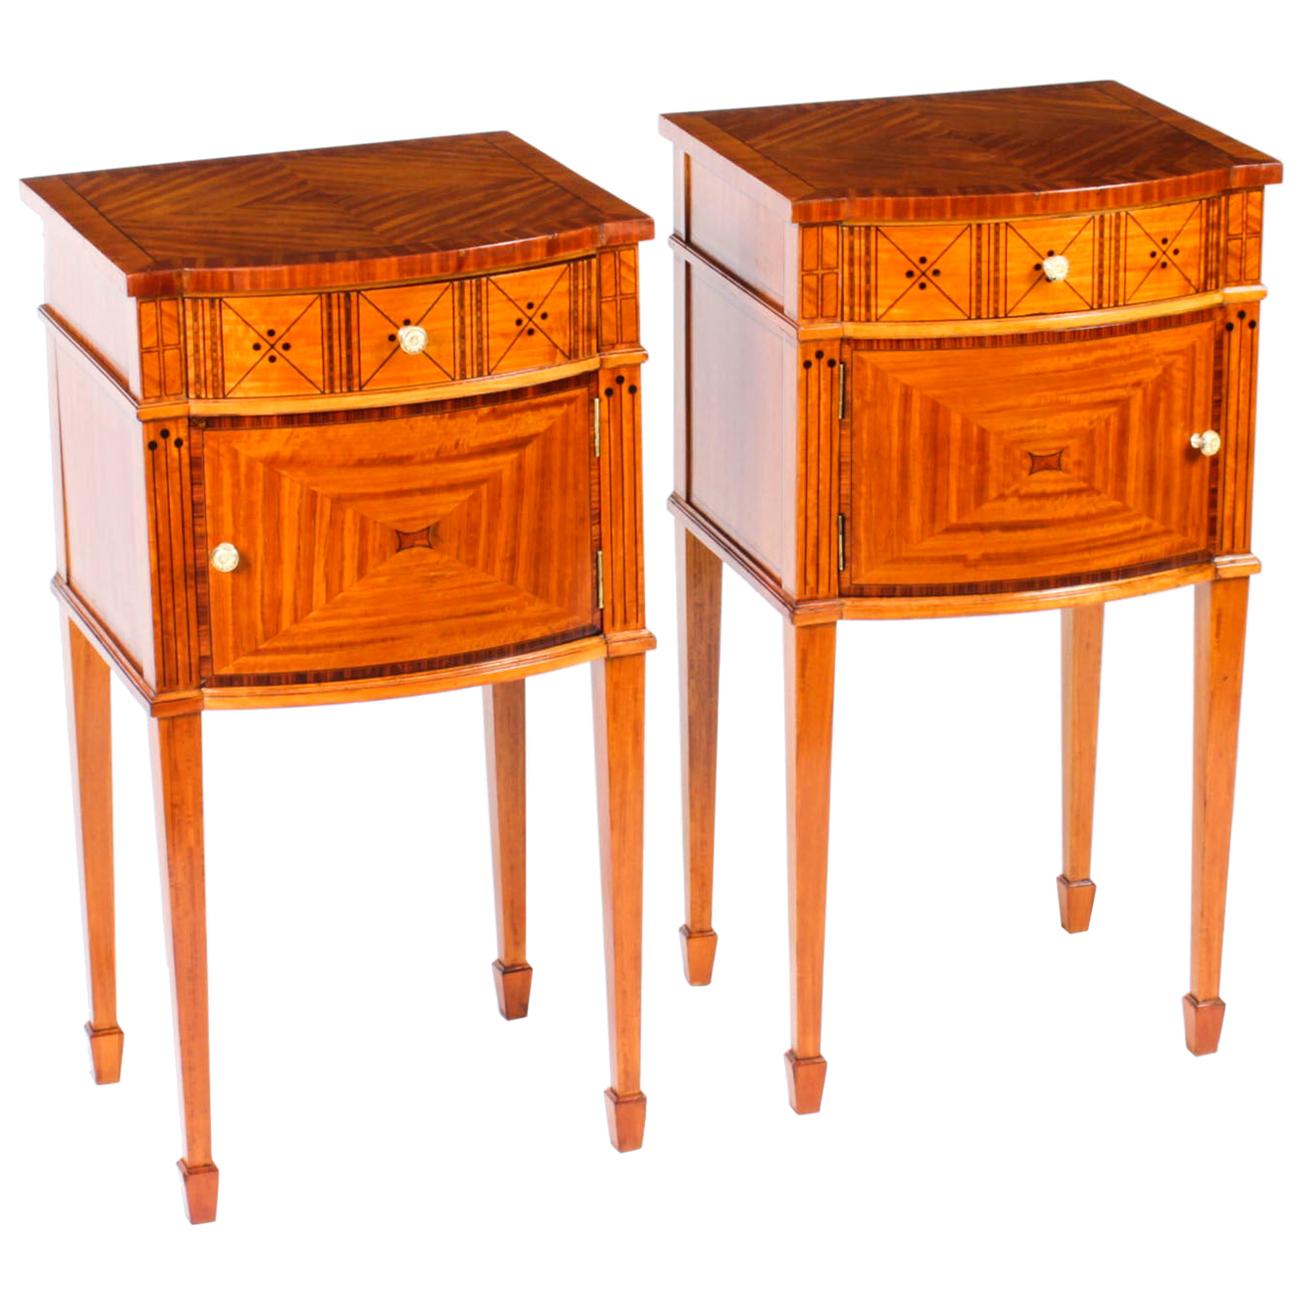 Antique Pair of French Maple & Co Satinwood Bedside Cabinets, 19th Century